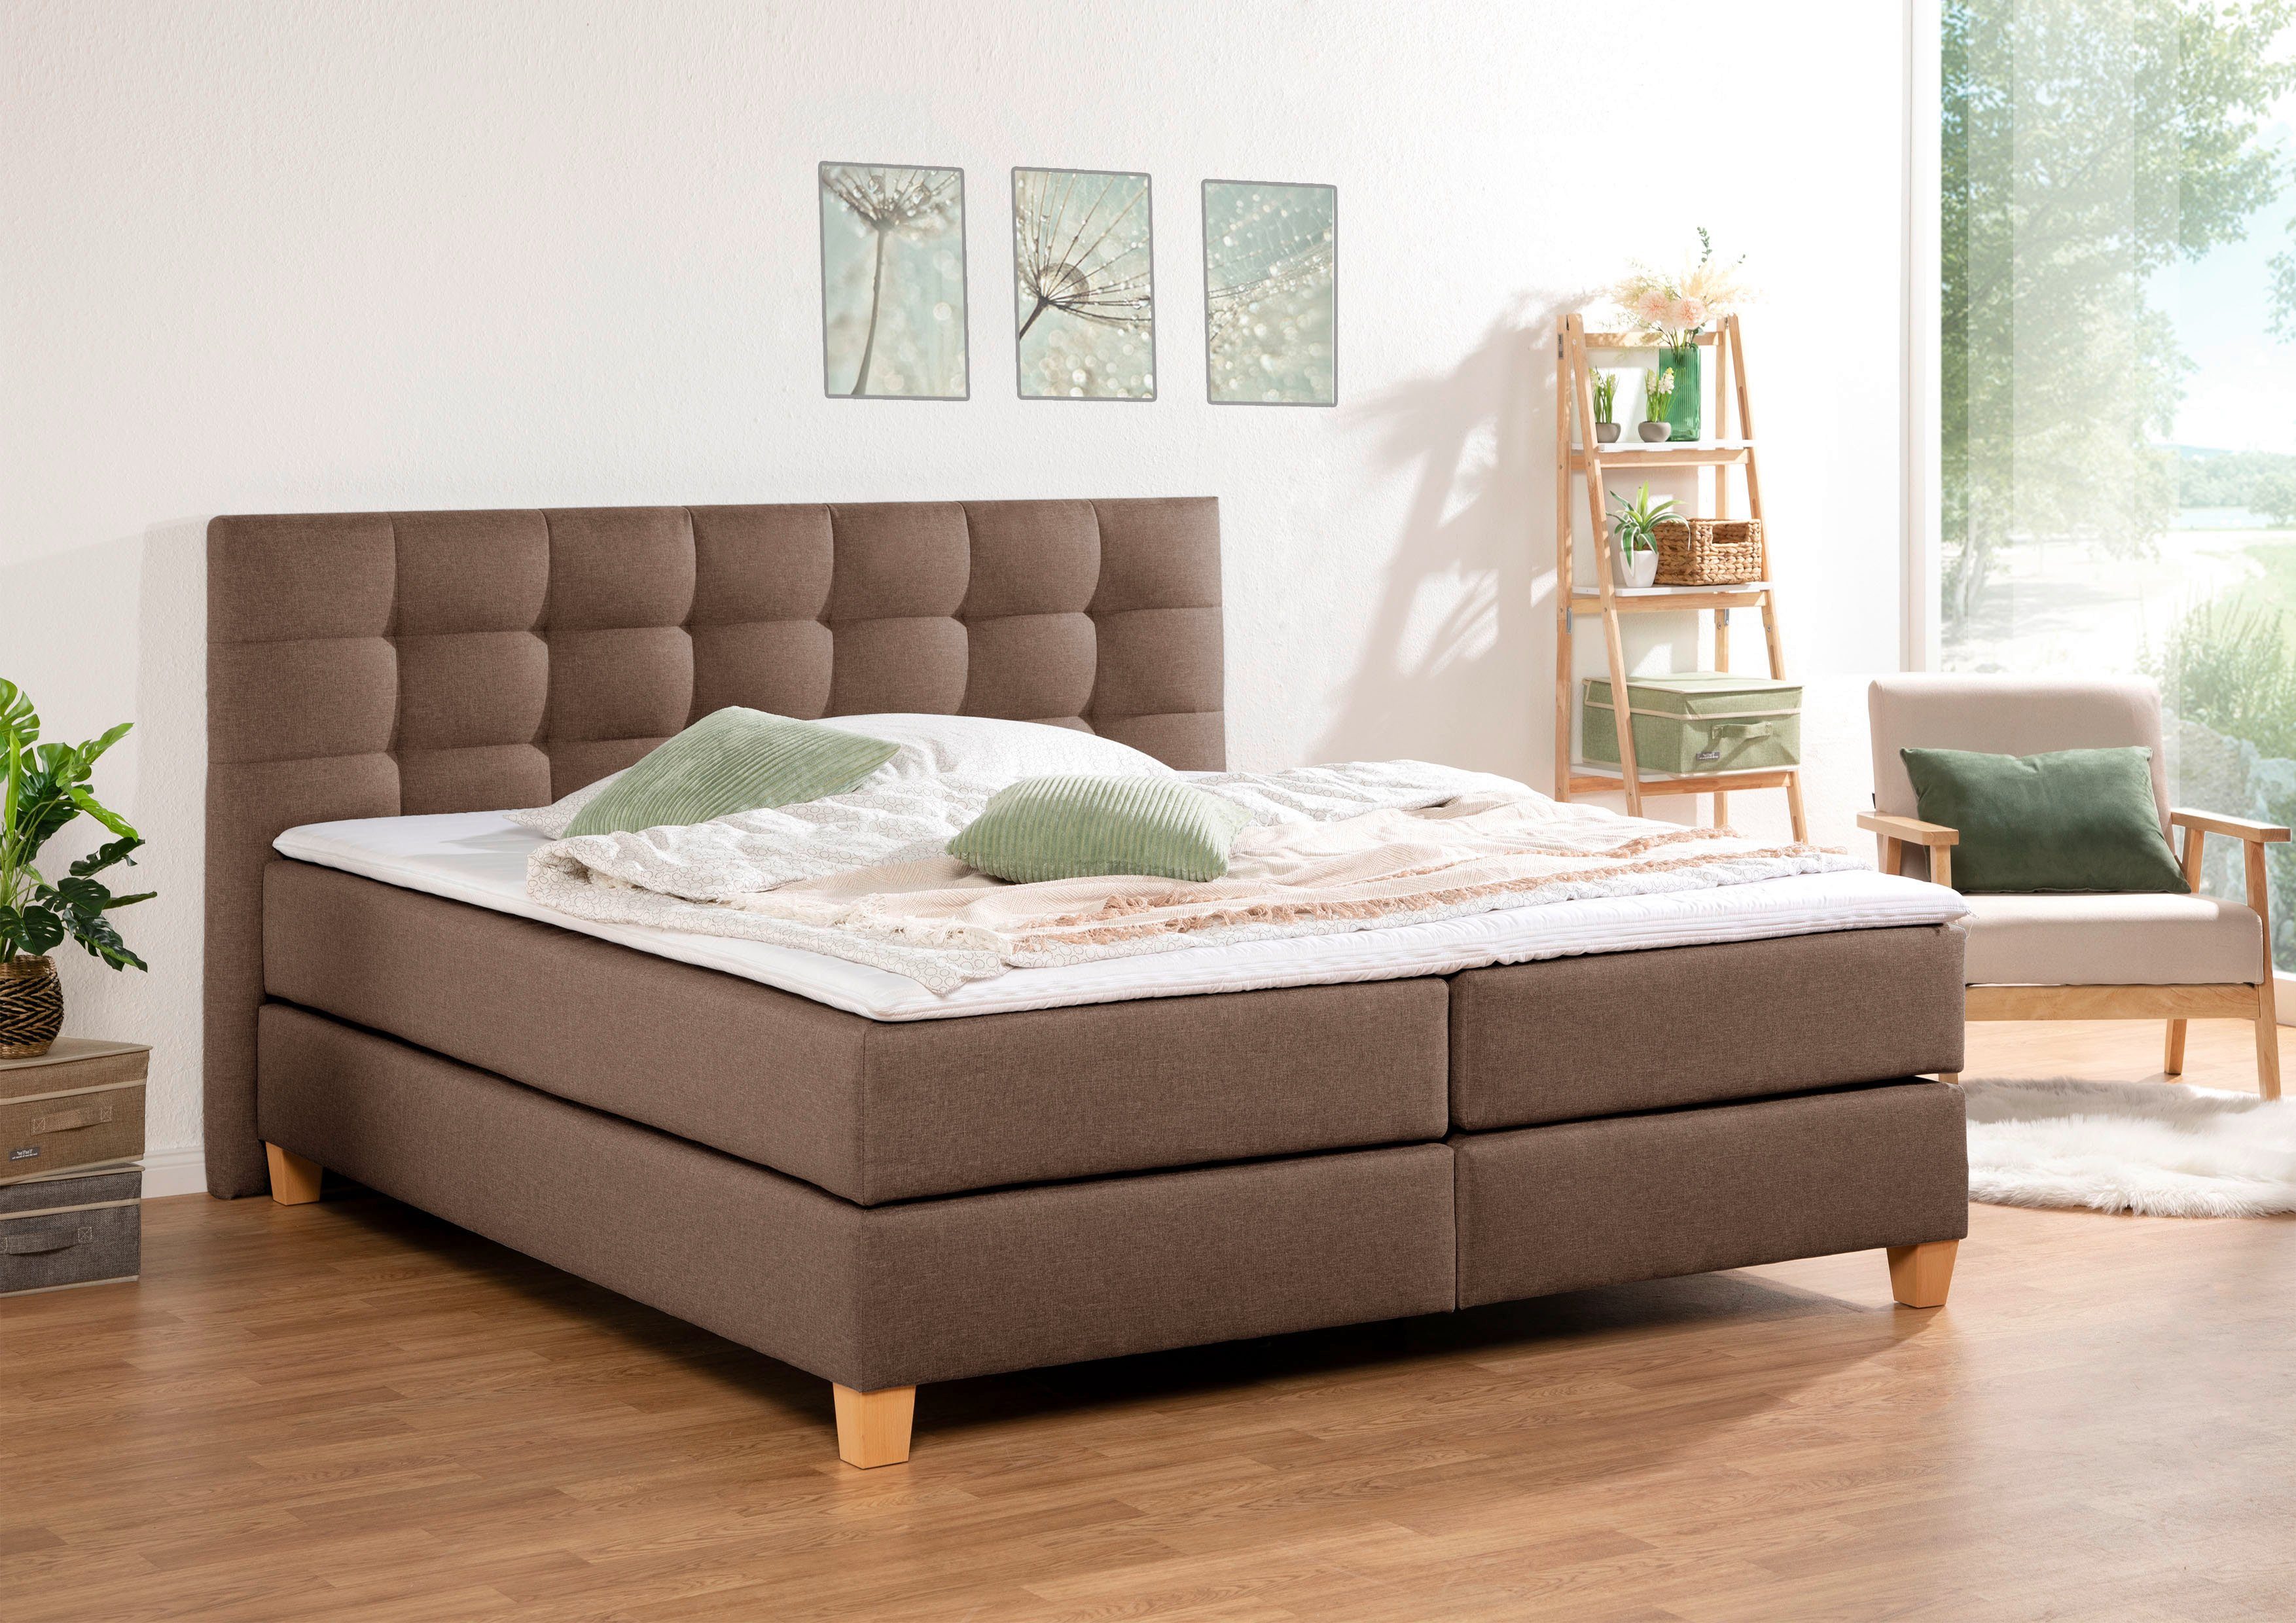 Home affaire Boxspring Moulay incl. topmatras, 6 breedten, 2 hardheden, tdk ook in hardheid 4, 3 mat